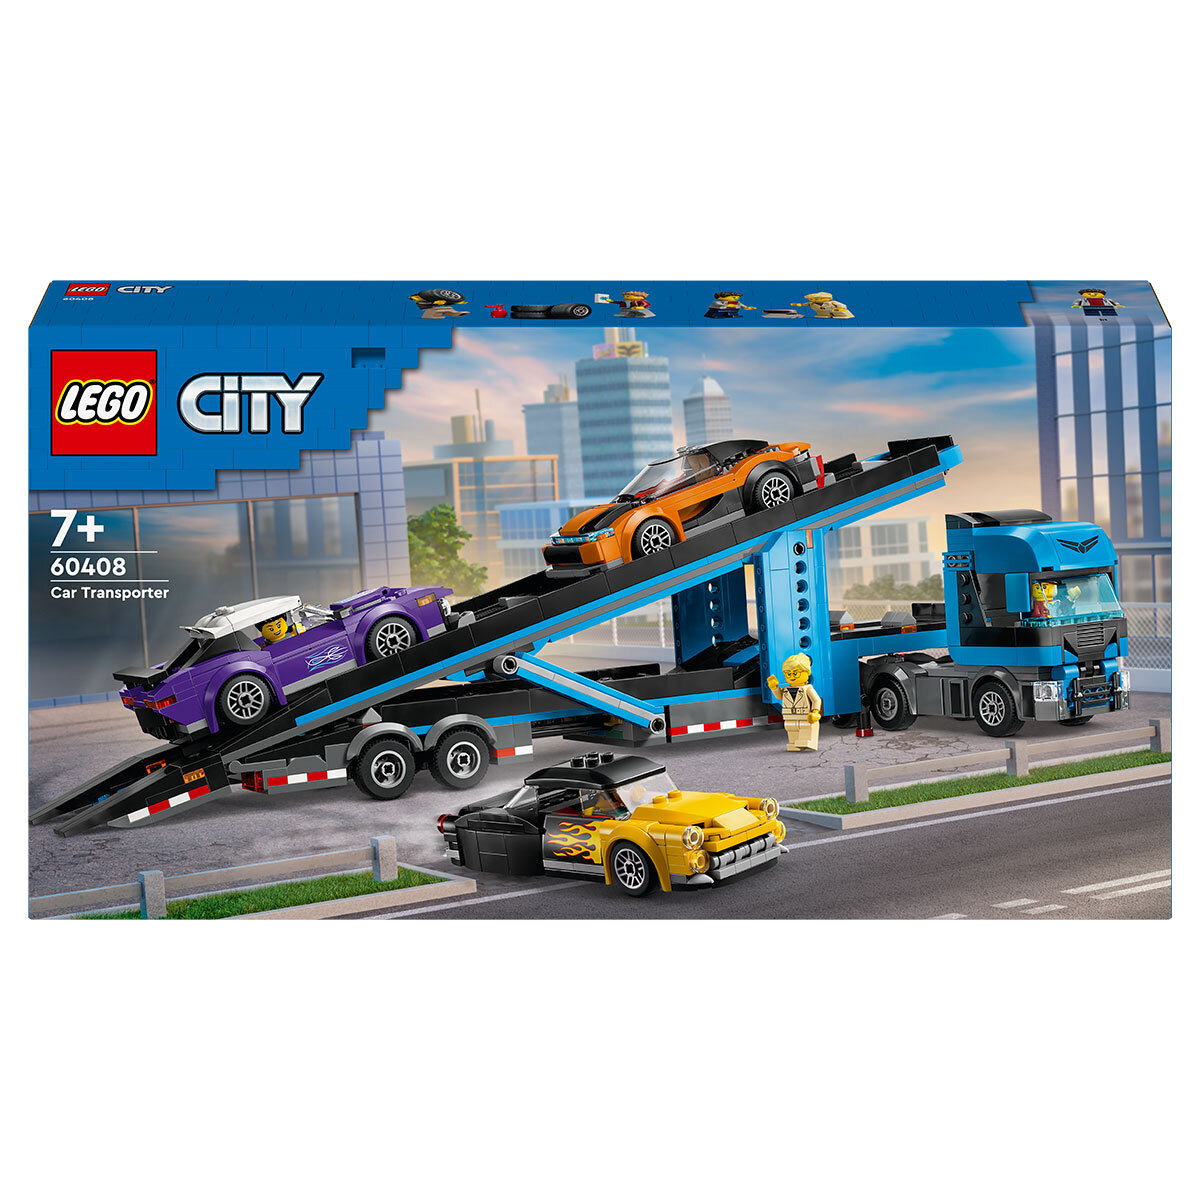 Lego City Car Transporter Truck with Sports Cars Box Image